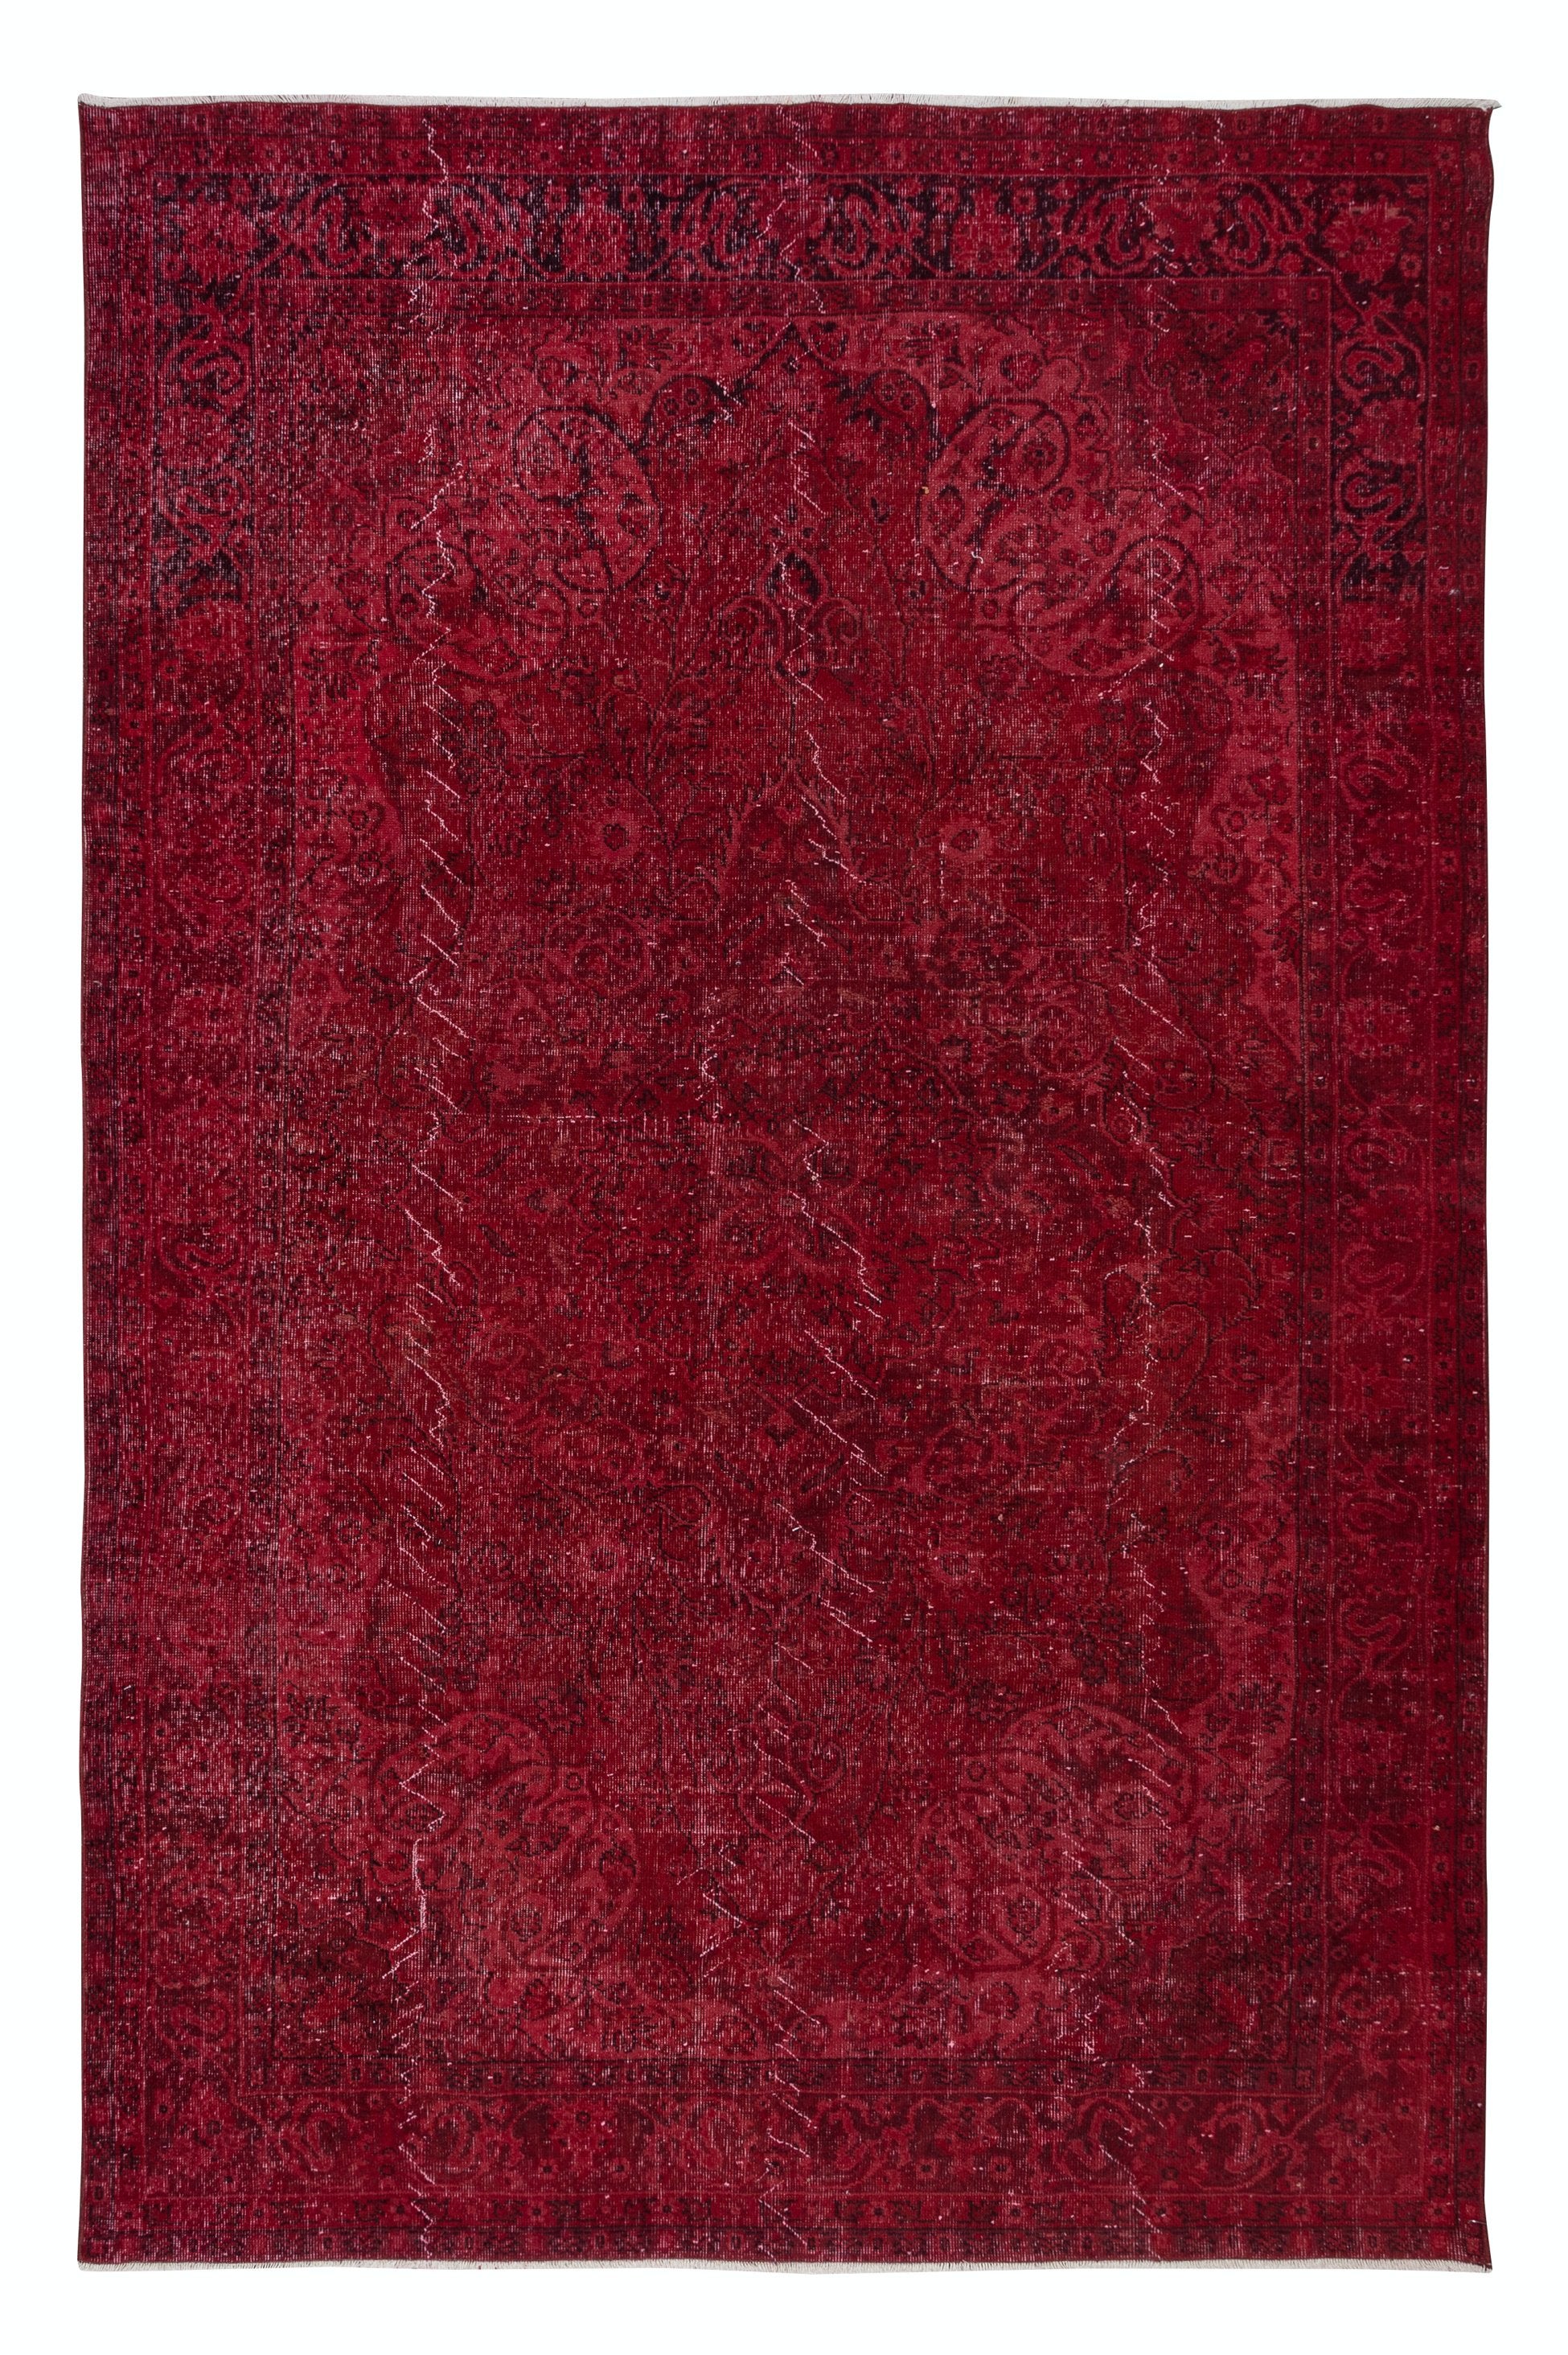 7x10.4 Ft Unique Handmade Burgundy Red Rug, Contemporary Turkish Wool Carpet For Sale